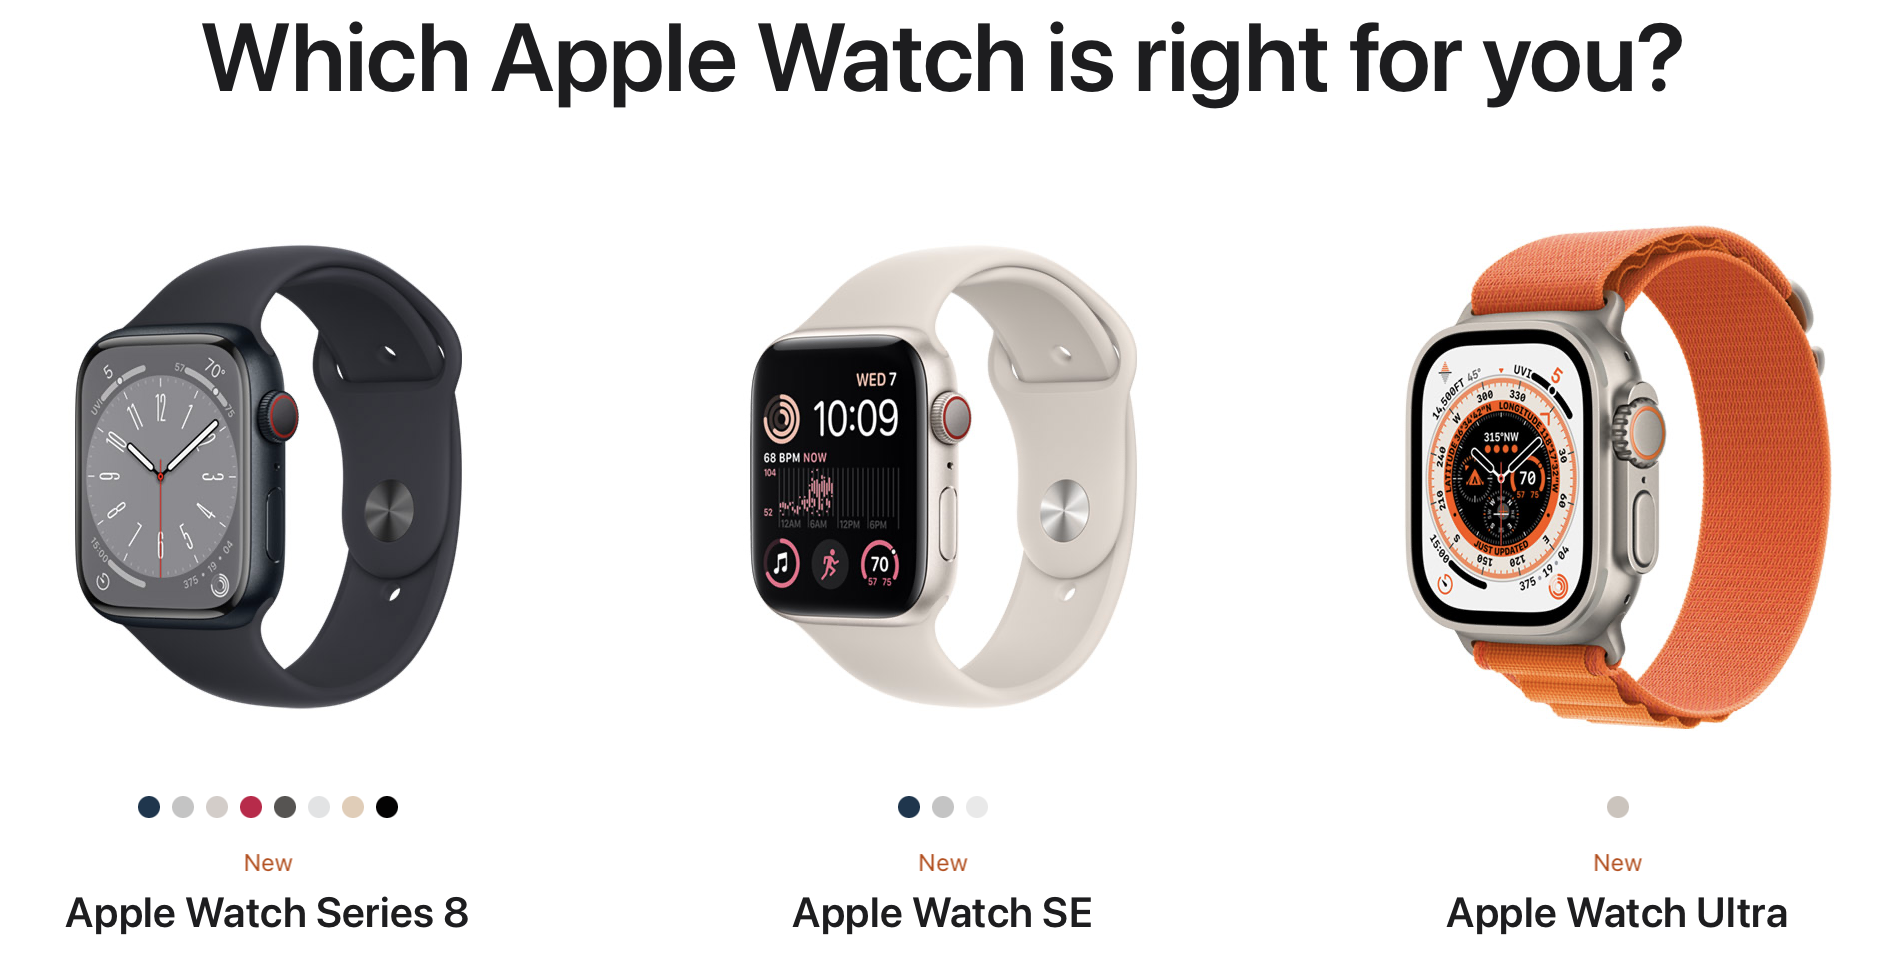 The Apple Sports watch Pricing model